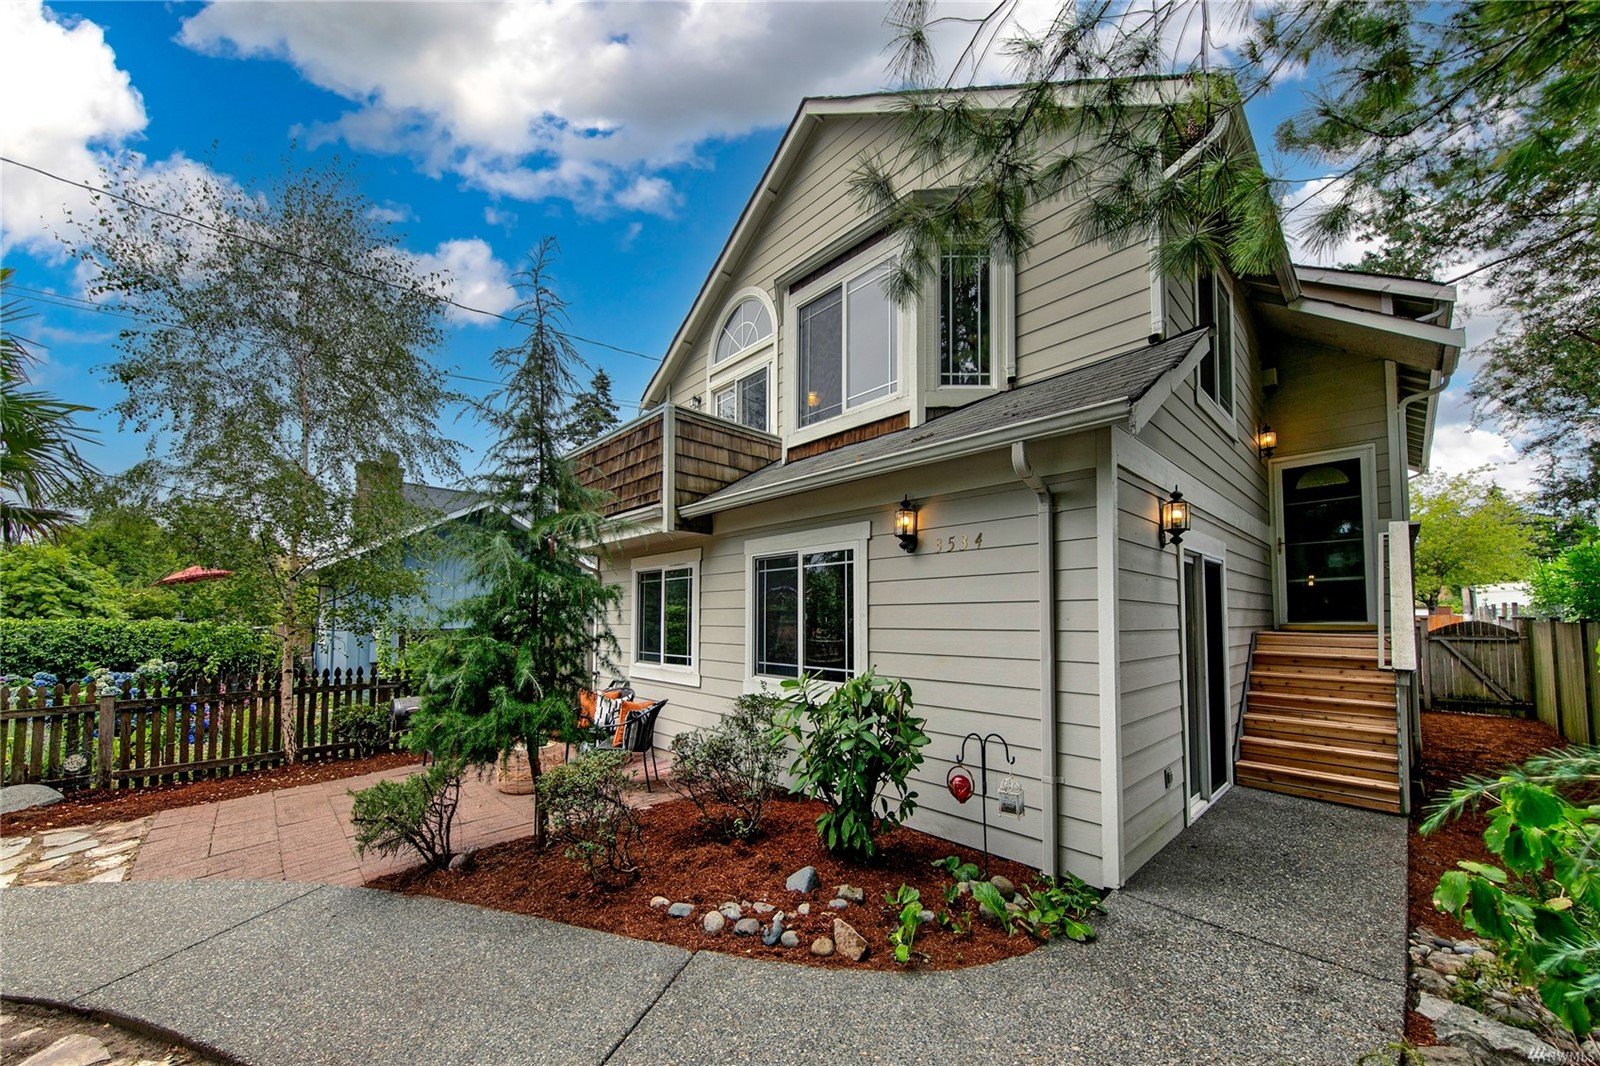 3534 SW 100th St, Seattle&lt;strong&gt;Sold for $820,000, Represented Seller&lt;/strong&gt;